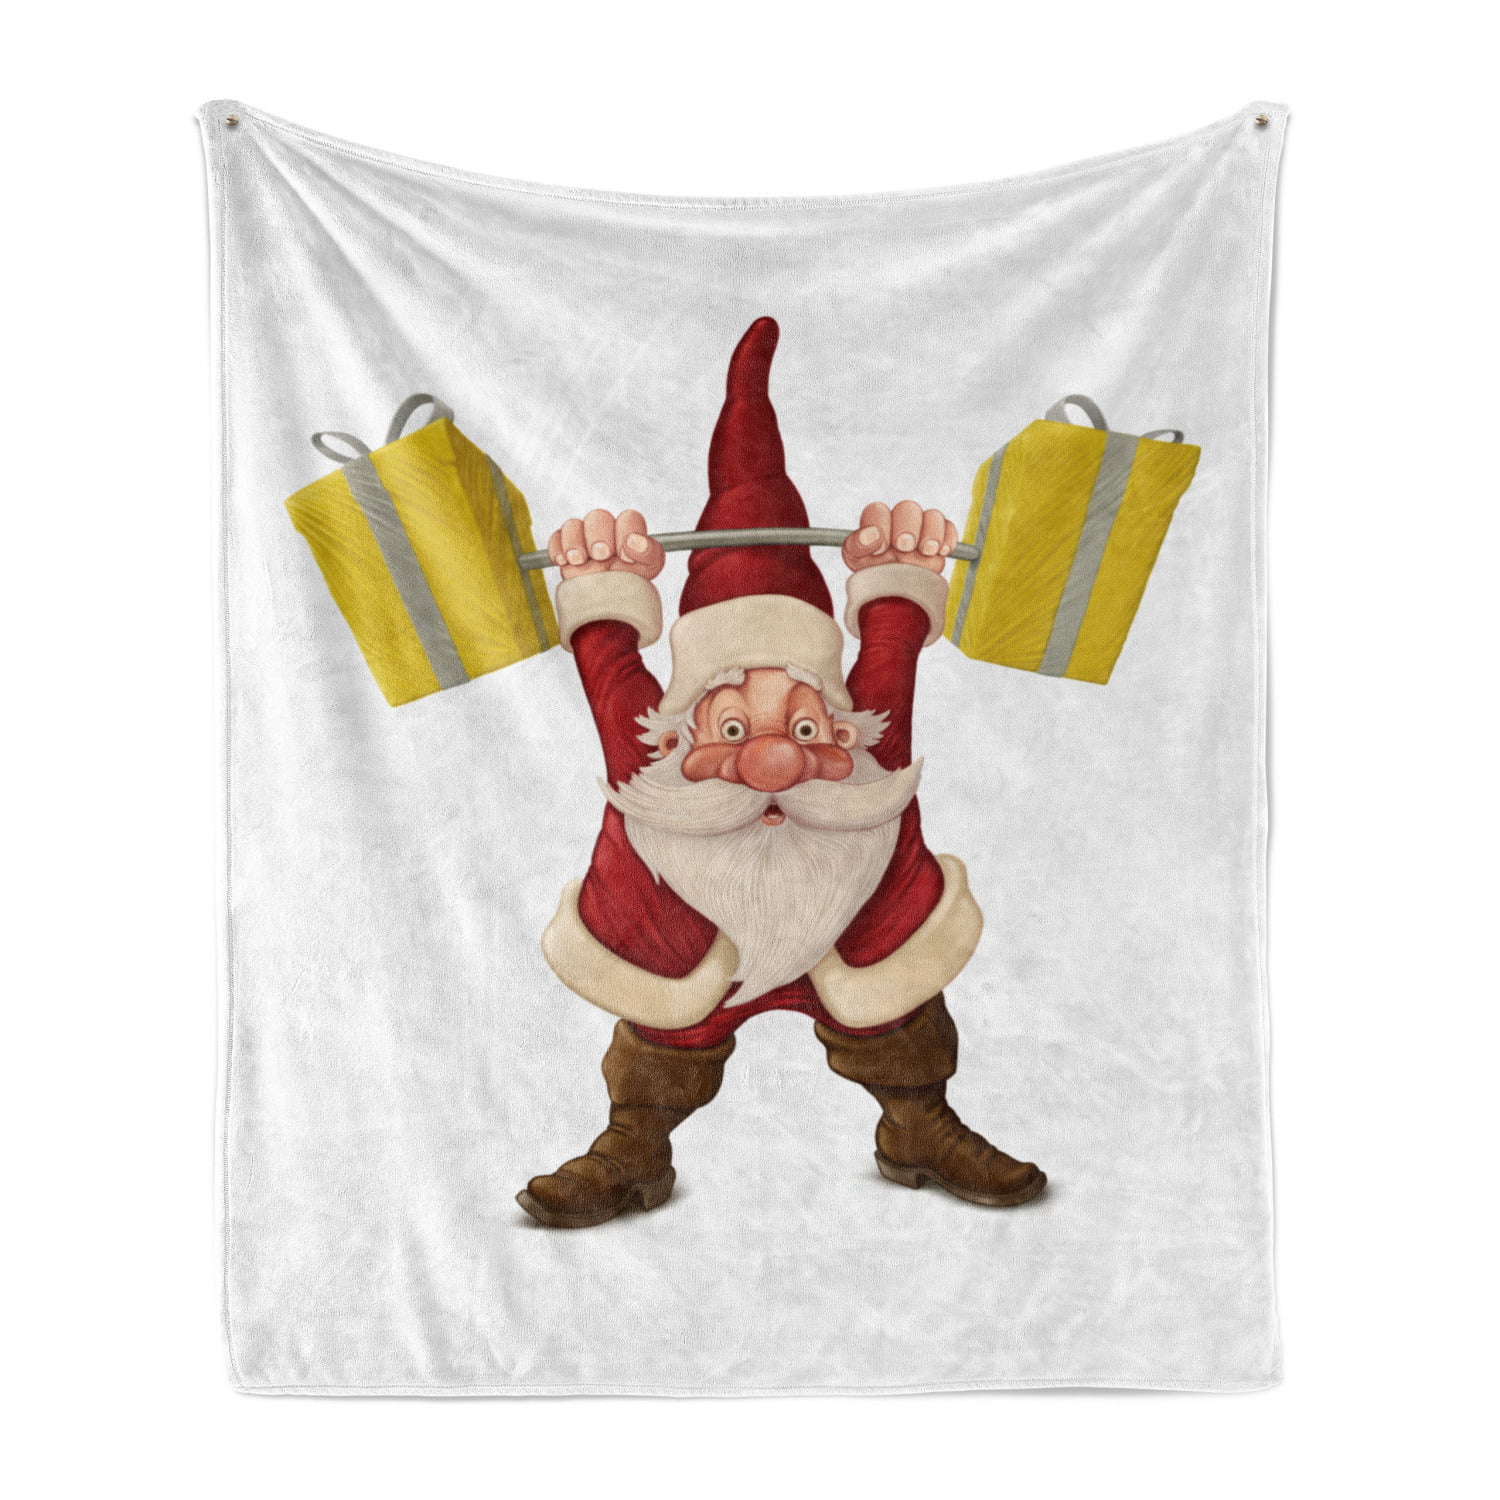 U Life Vintage Merry Christmas Santa Claus Soft Fleece Throw Blanket Blankets for Nap Couch Bed Kids Adults 50 x 60 inch 